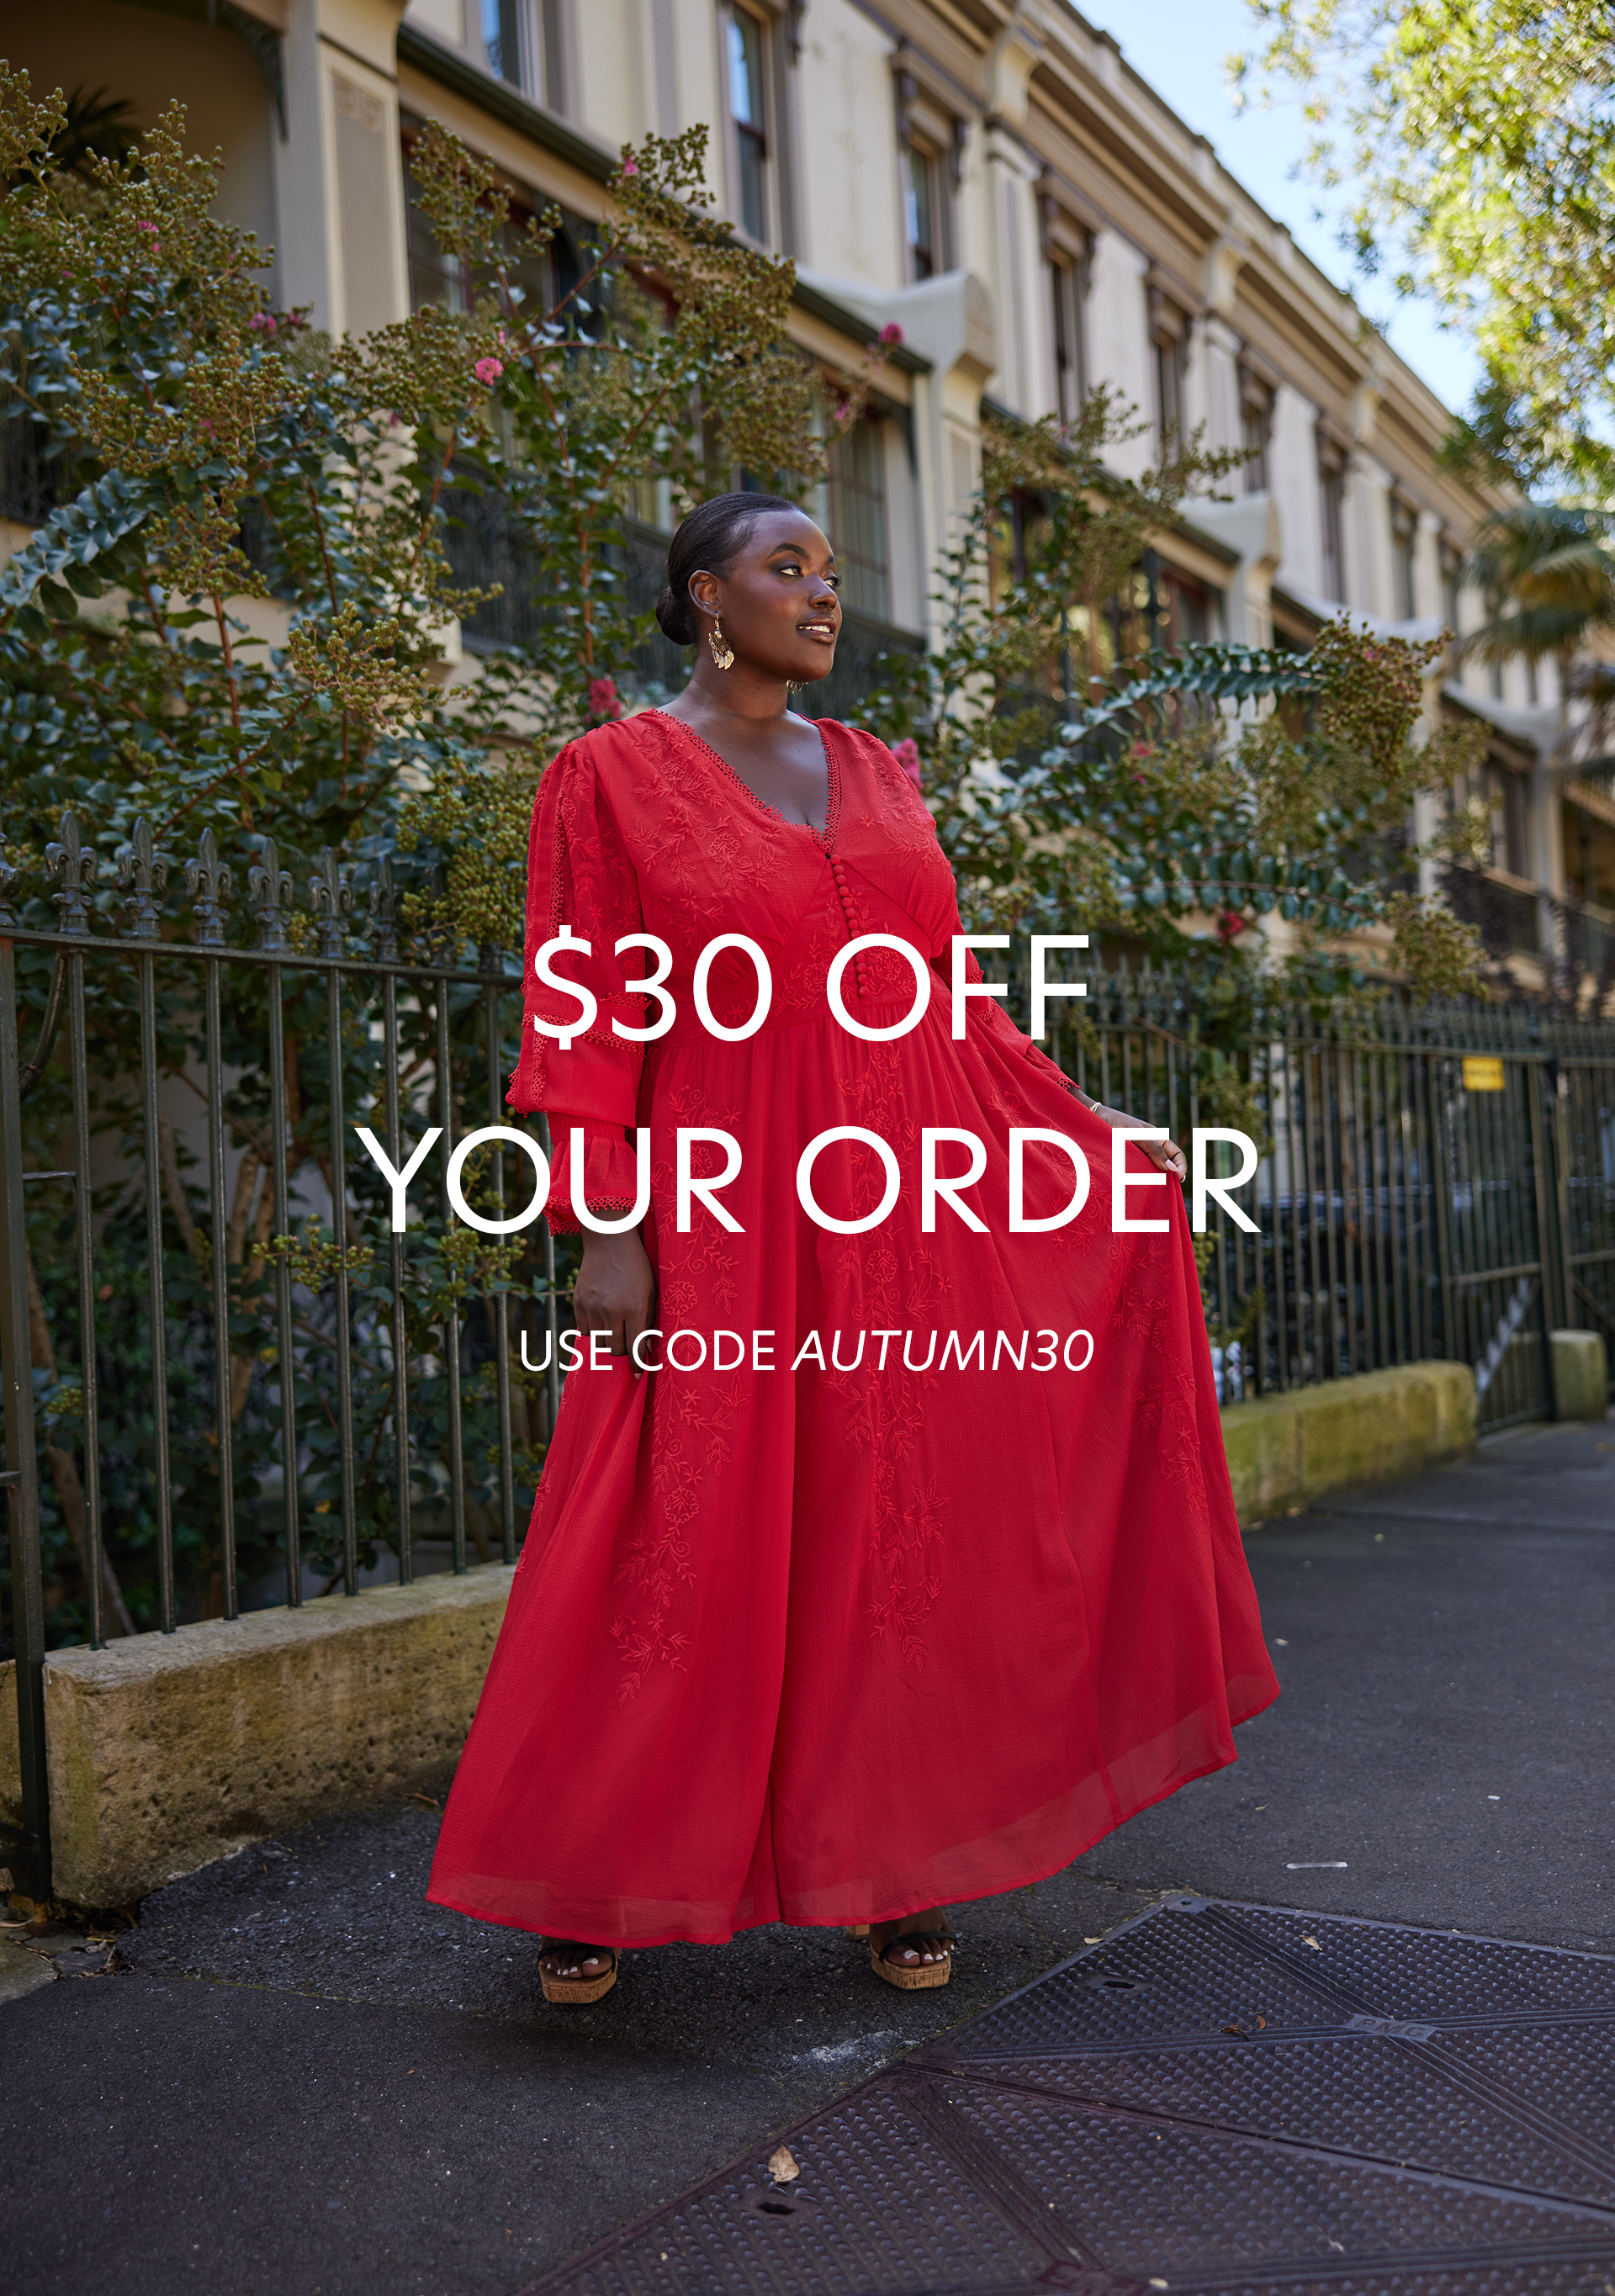 $30 OFF YOU ORDER